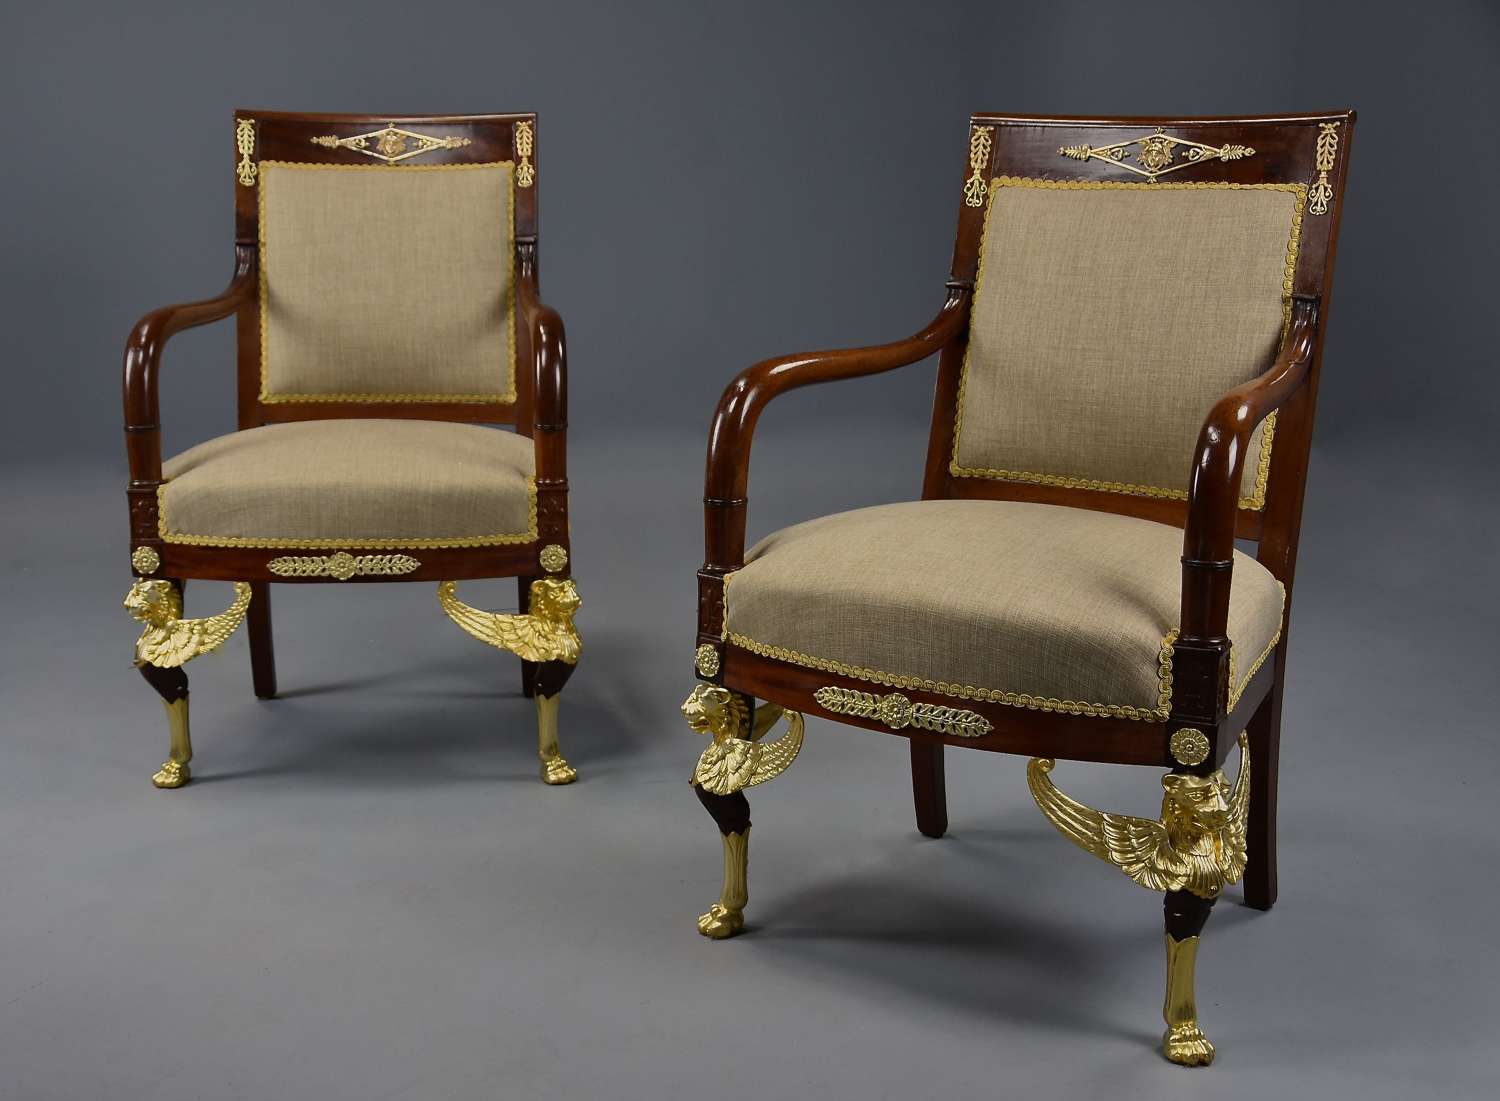 Pair of late 19thc French mahogany fauteuils in the Empire style